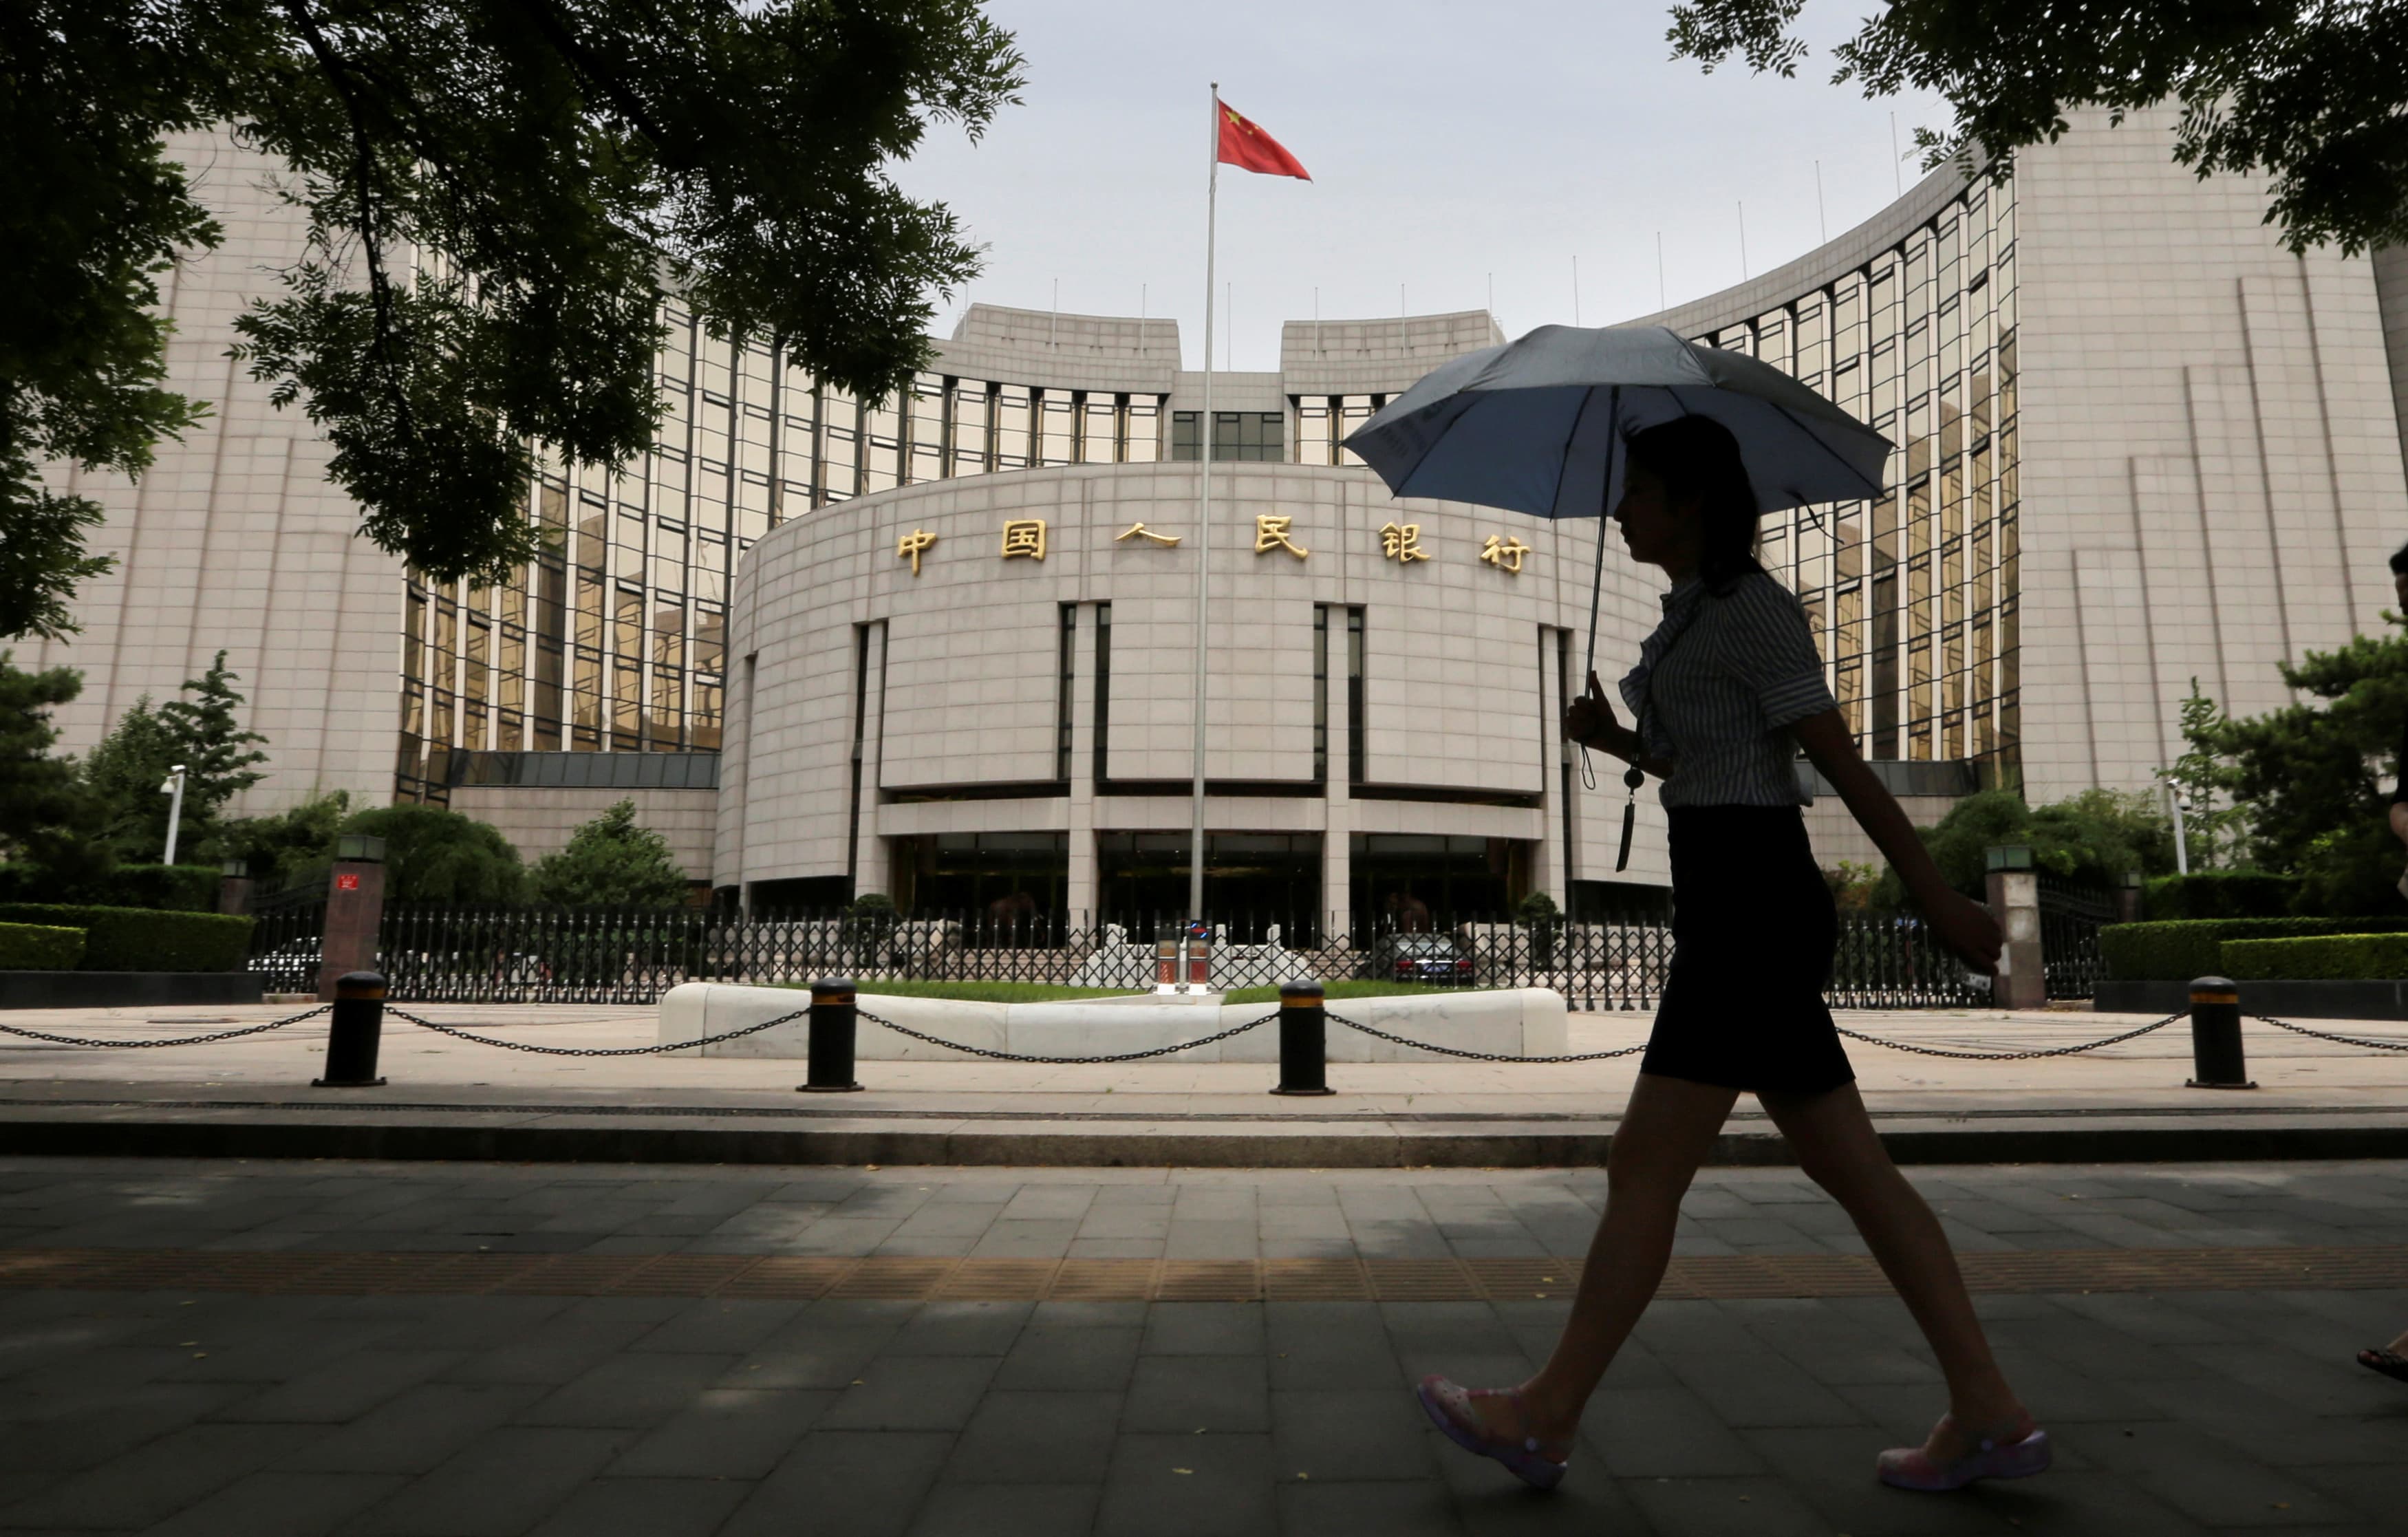 New signs show China is repressing debt again